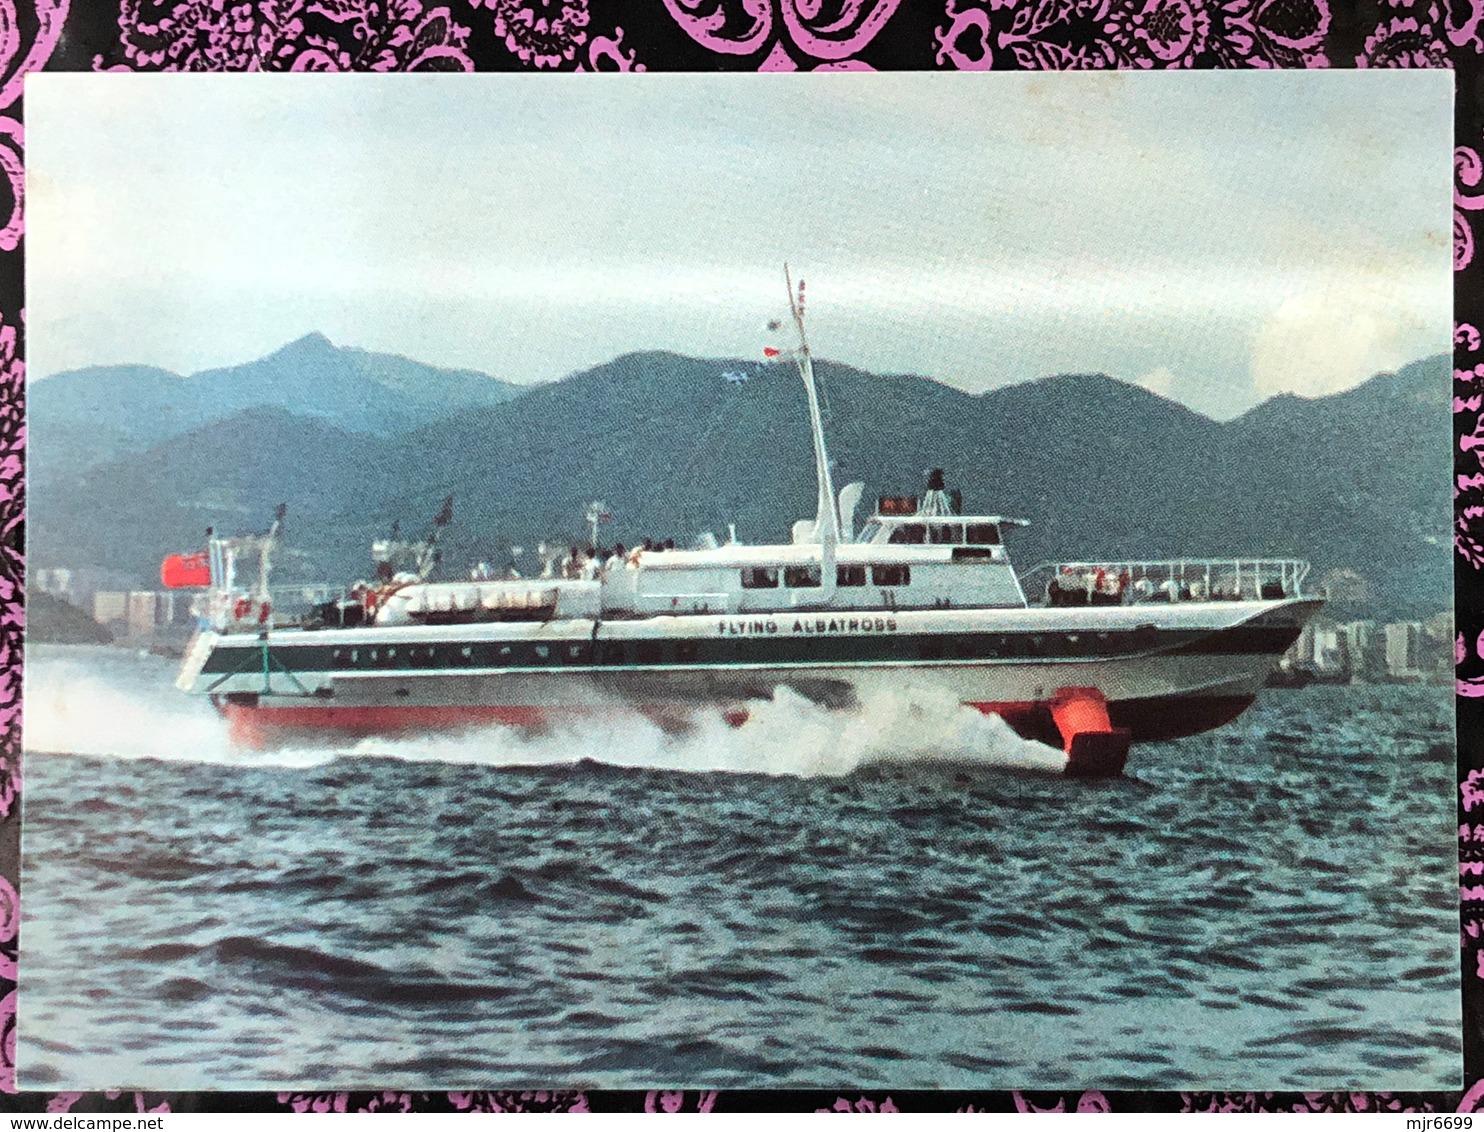 MACAU 1986 POST OFFICE ISSUE POST CARD - HYDROFOIL. - Chine